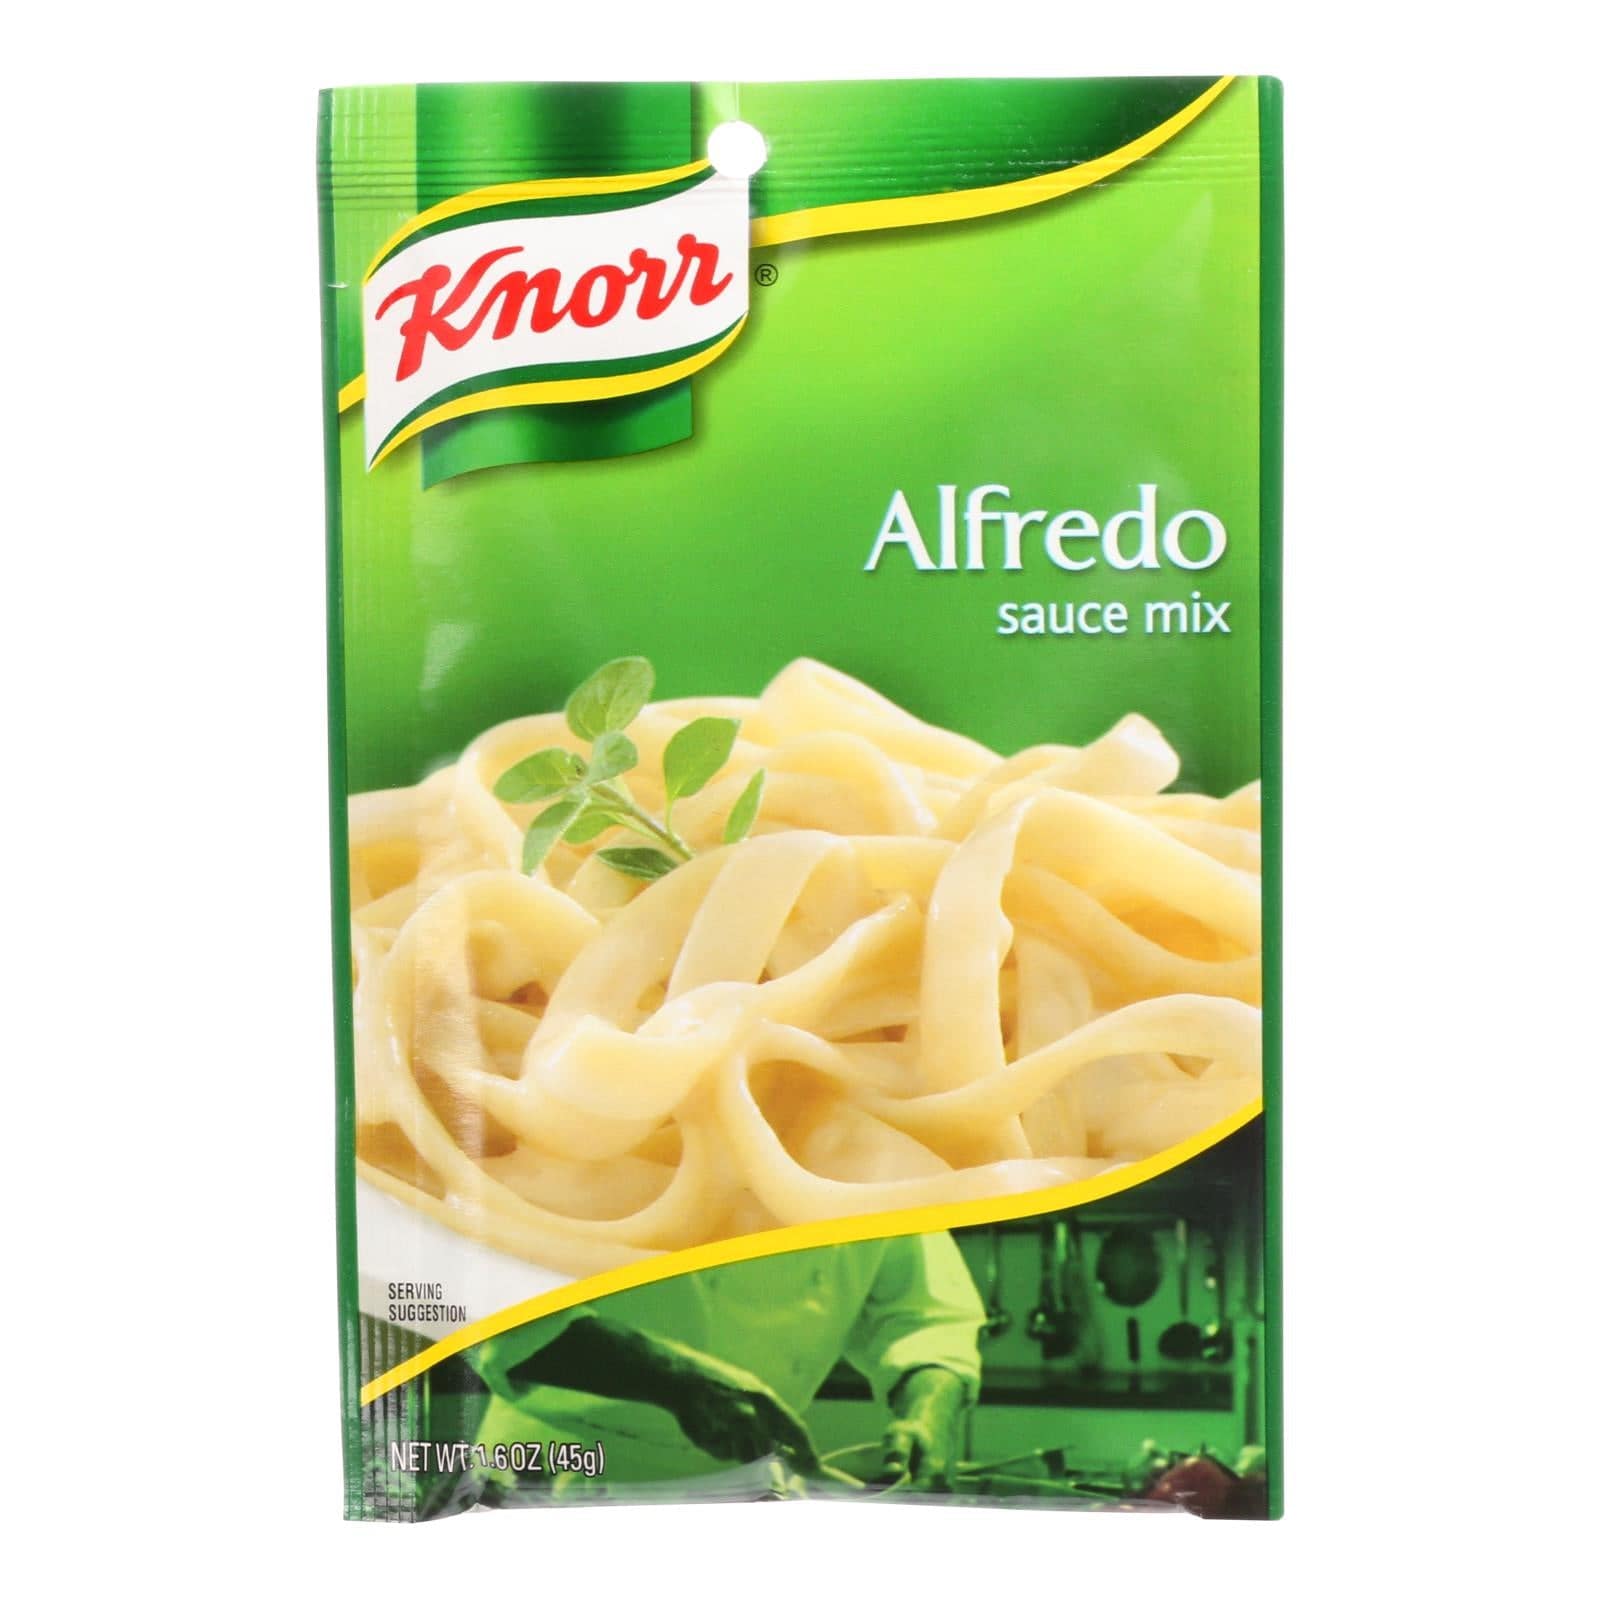 Buy Knorr Sauce Mix - Alfredo - 1.6 Oz - Case Of 12  at OnlyNaturals.us